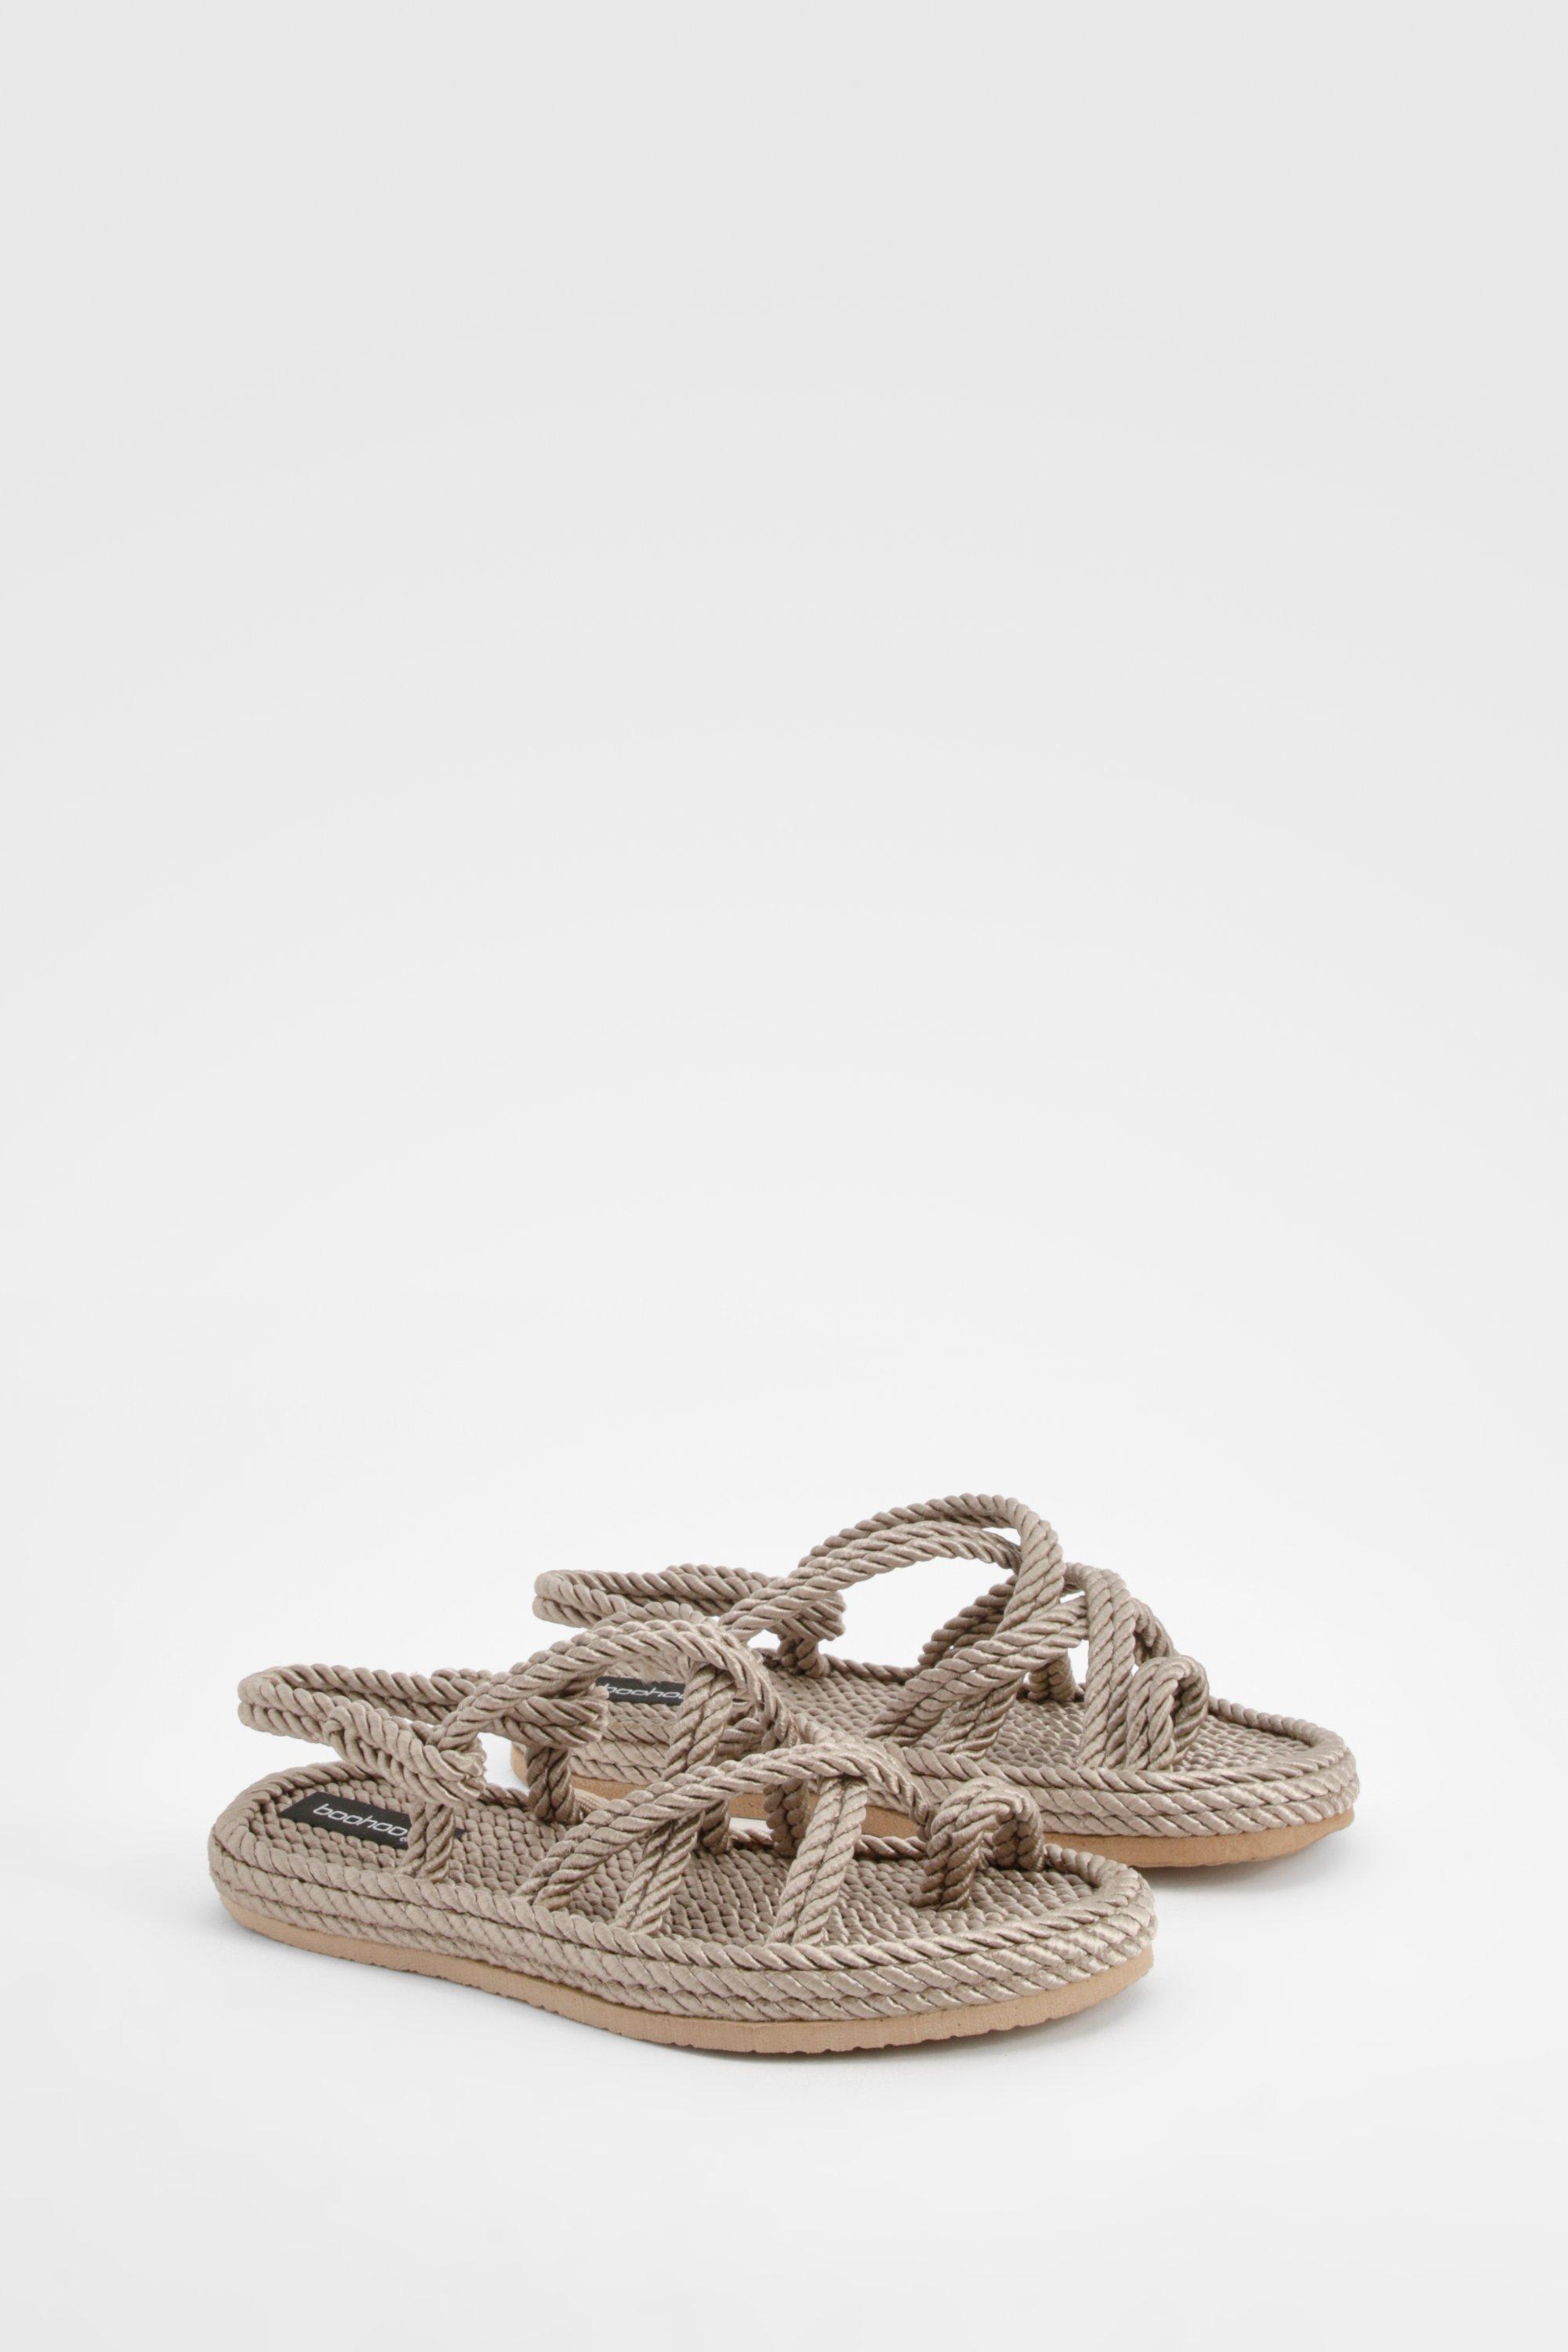 Crossover Front Rope Sandals - Beige - 5